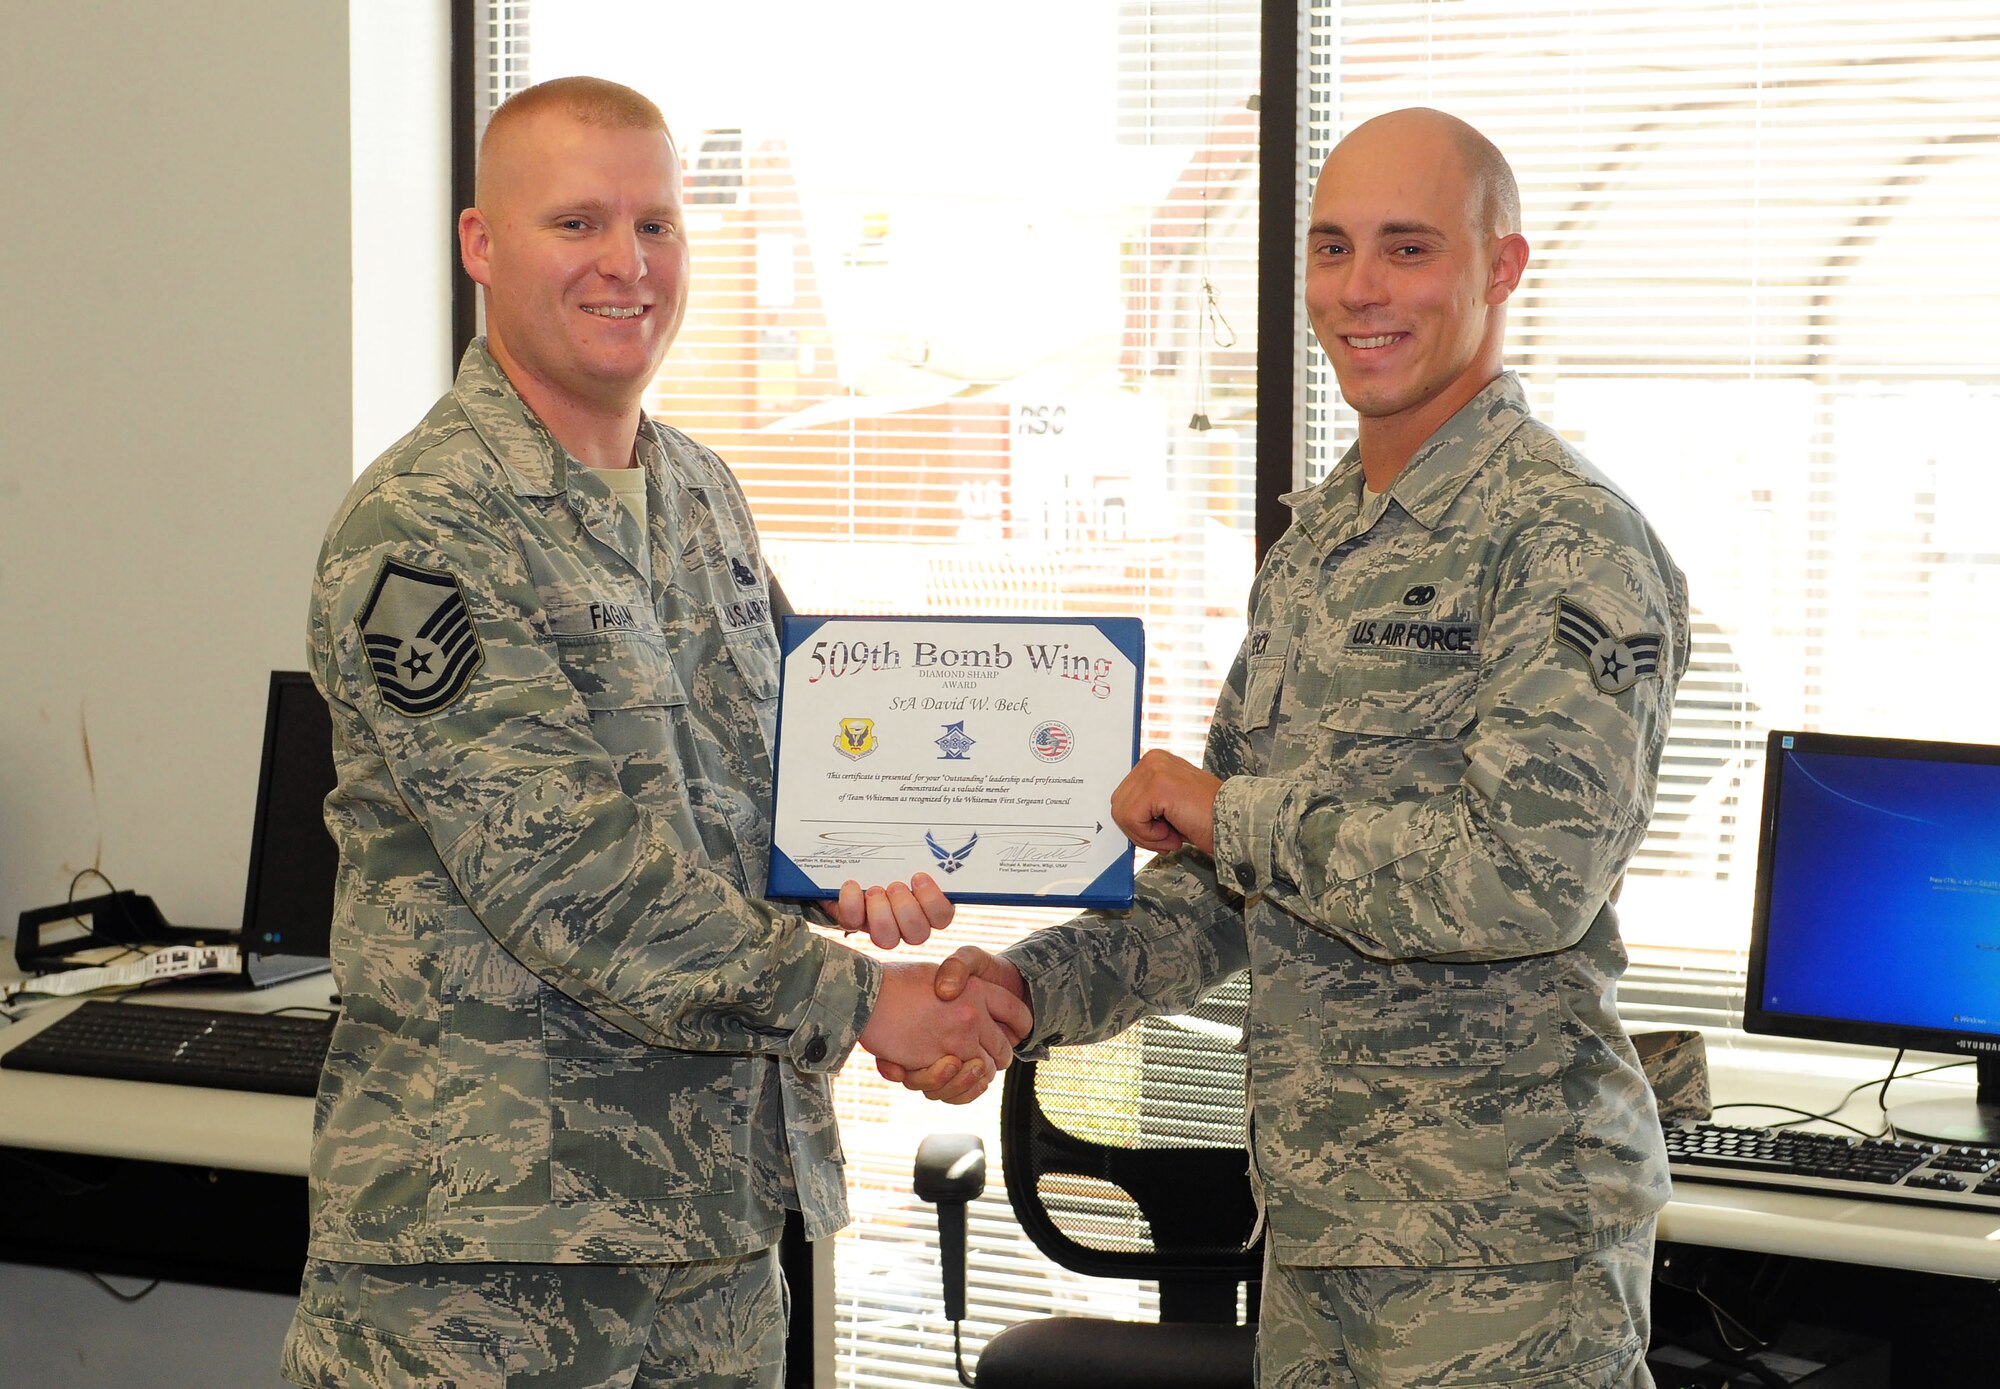 Master Sgt. Steven Fagan, 495th Fighter Group, Detachment 303 interim first sergeant, presents the Diamond Sharp Award to Senior Airman David Beck, 495th FG, Det. 303 integrated avionics journeyman, Sept. 11, 2015, at Whiteman Air Force Base, Mo. Beck organized the Philip Macri Golf Tournament which raised $10,000 for local disabled students, coached two little league baseball teams, and earned a 3.4 GPA on a class toward his bachelor's degree in biology. (U.S. Air Force photo by Airman 1st Class Jazmin Smith/Released)